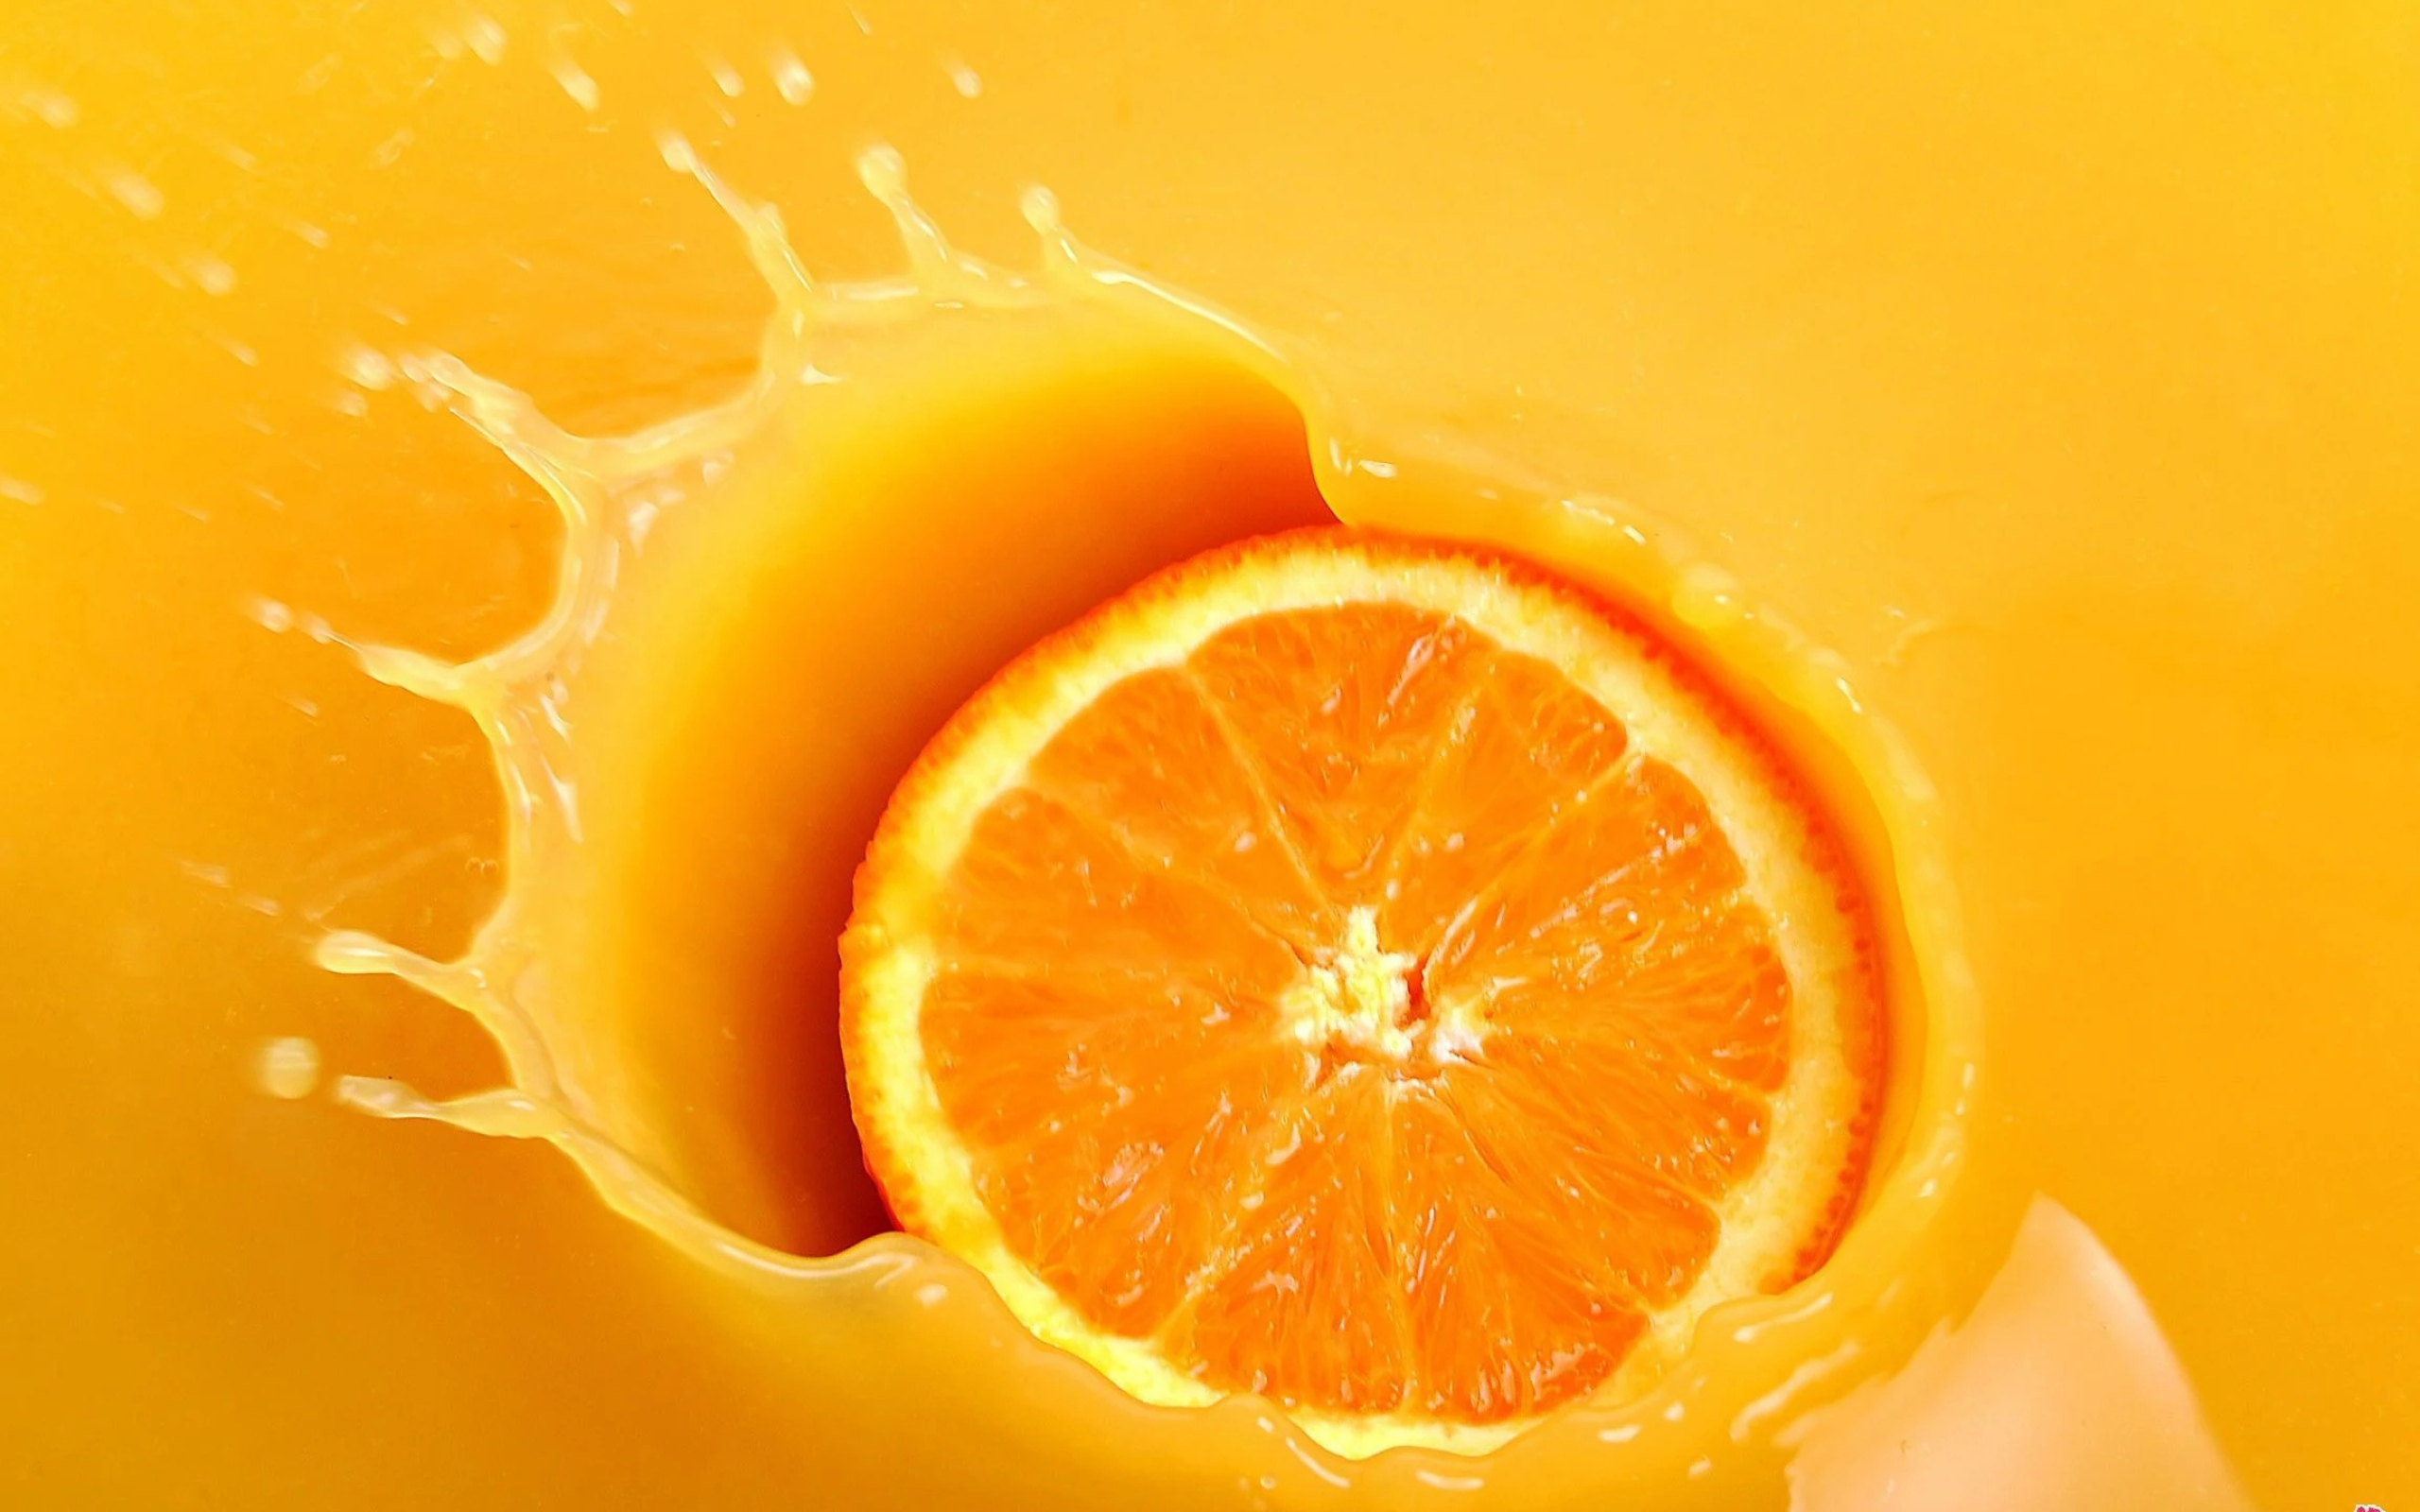 Orange: Divided into "segments" which have thin, tough skins that hold together many little sections with juice inside. 2560x1600 HD Wallpaper.